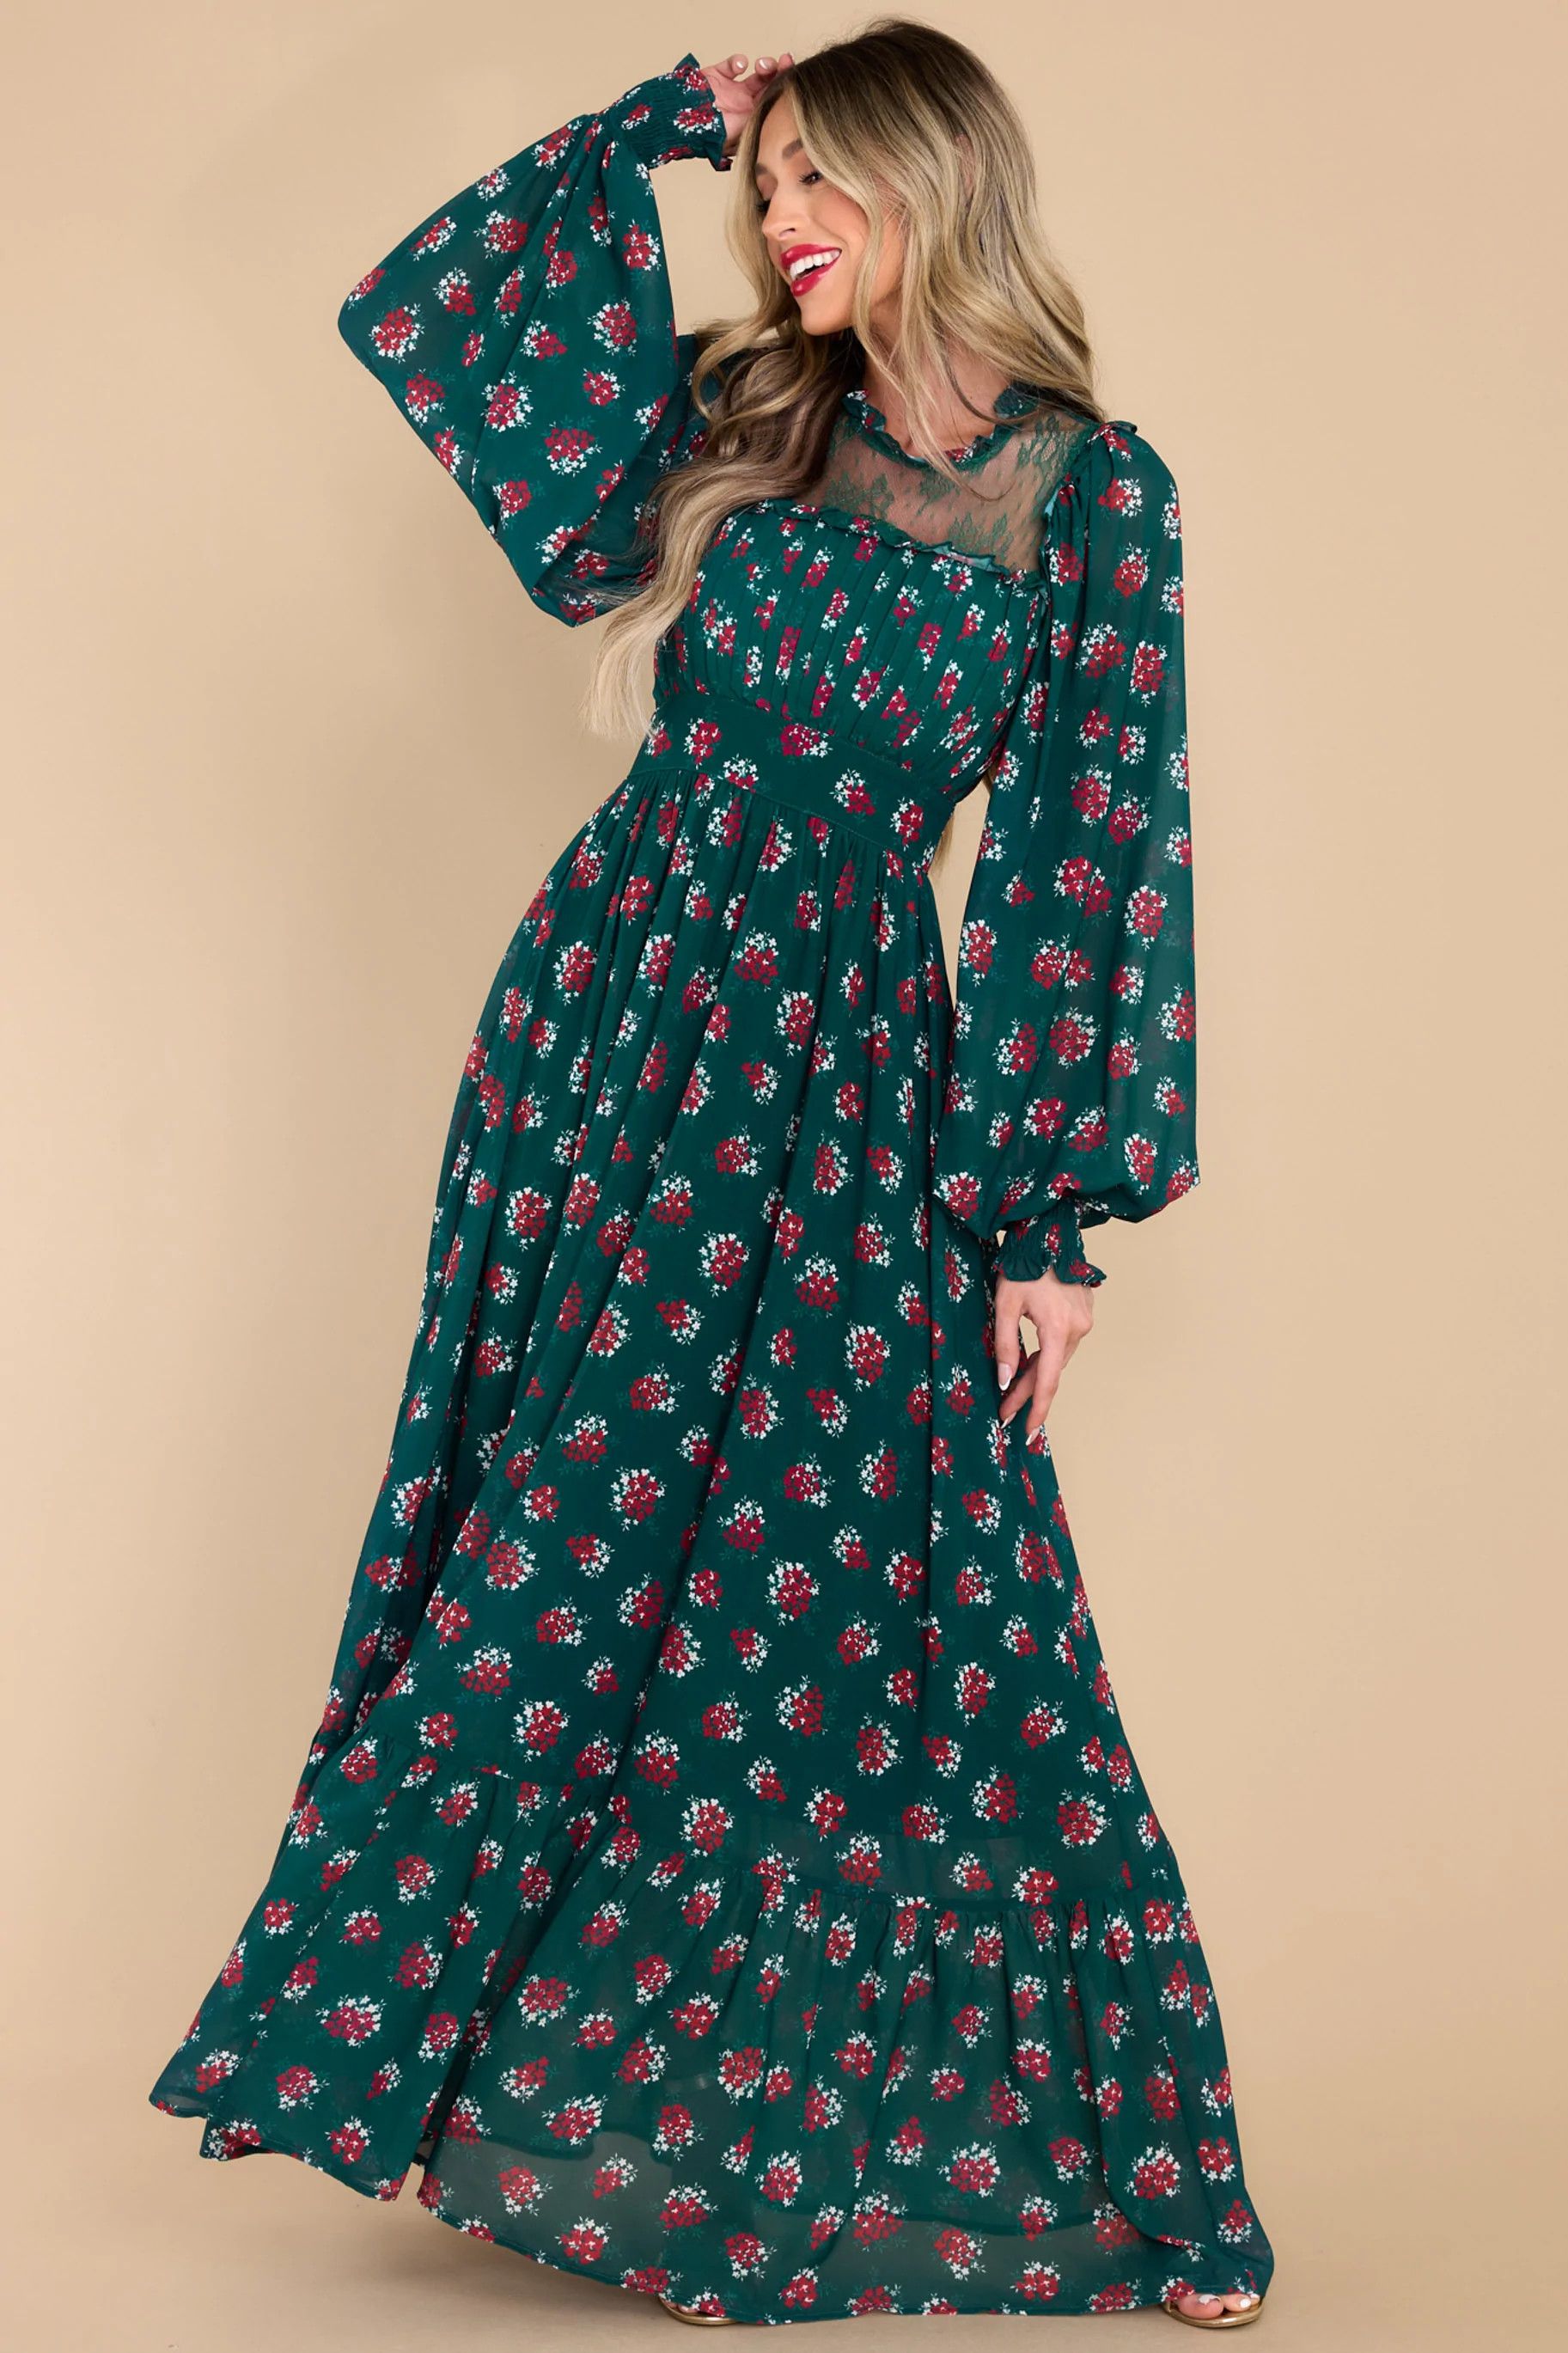 All You Need Is Love Dark Emerald Floral Print Maxi Dress | Red Dress 